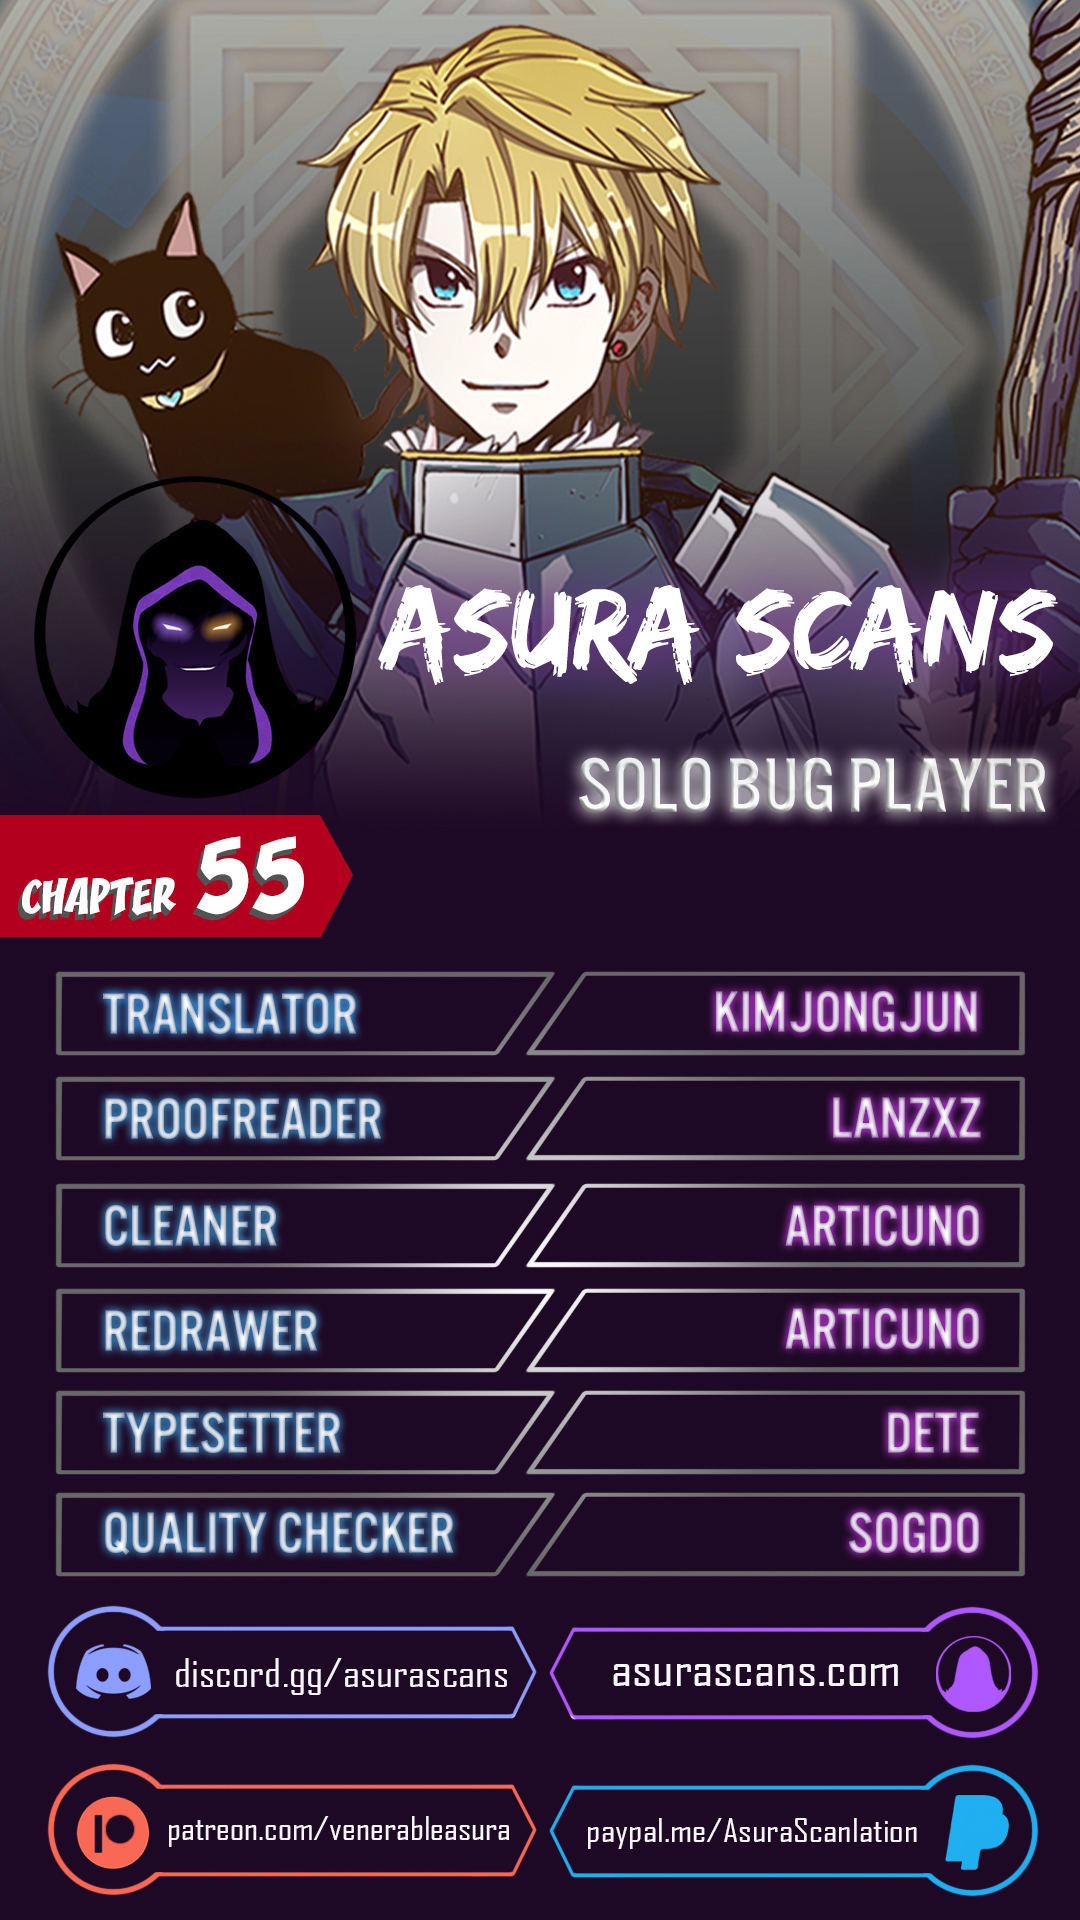 Solo Bug Player - Chapter 15235 - Image 1